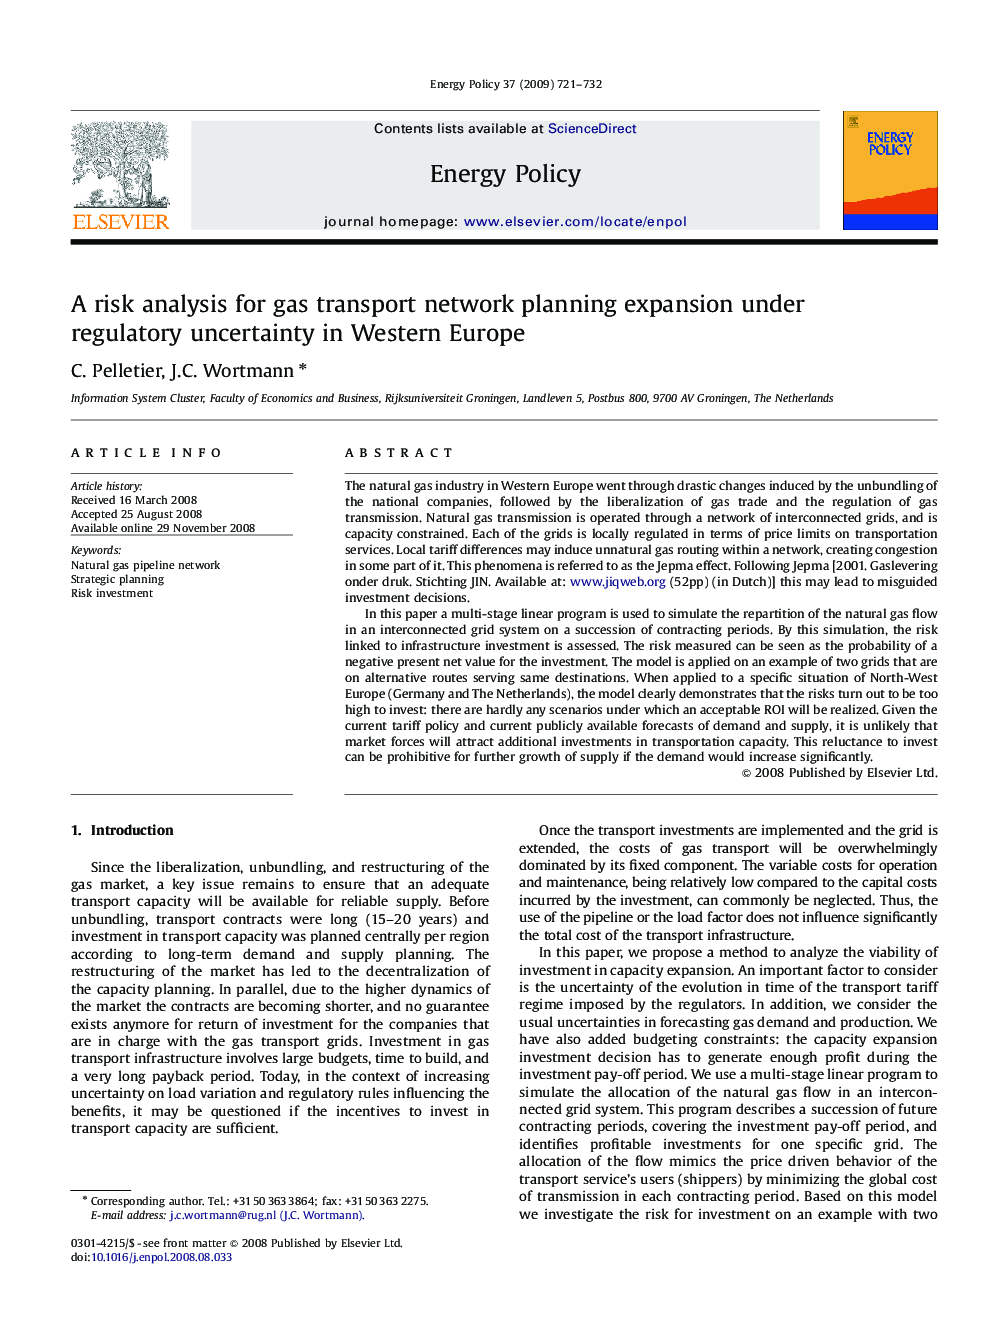 A risk analysis for gas transport network planning expansion under regulatory uncertainty in Western Europe